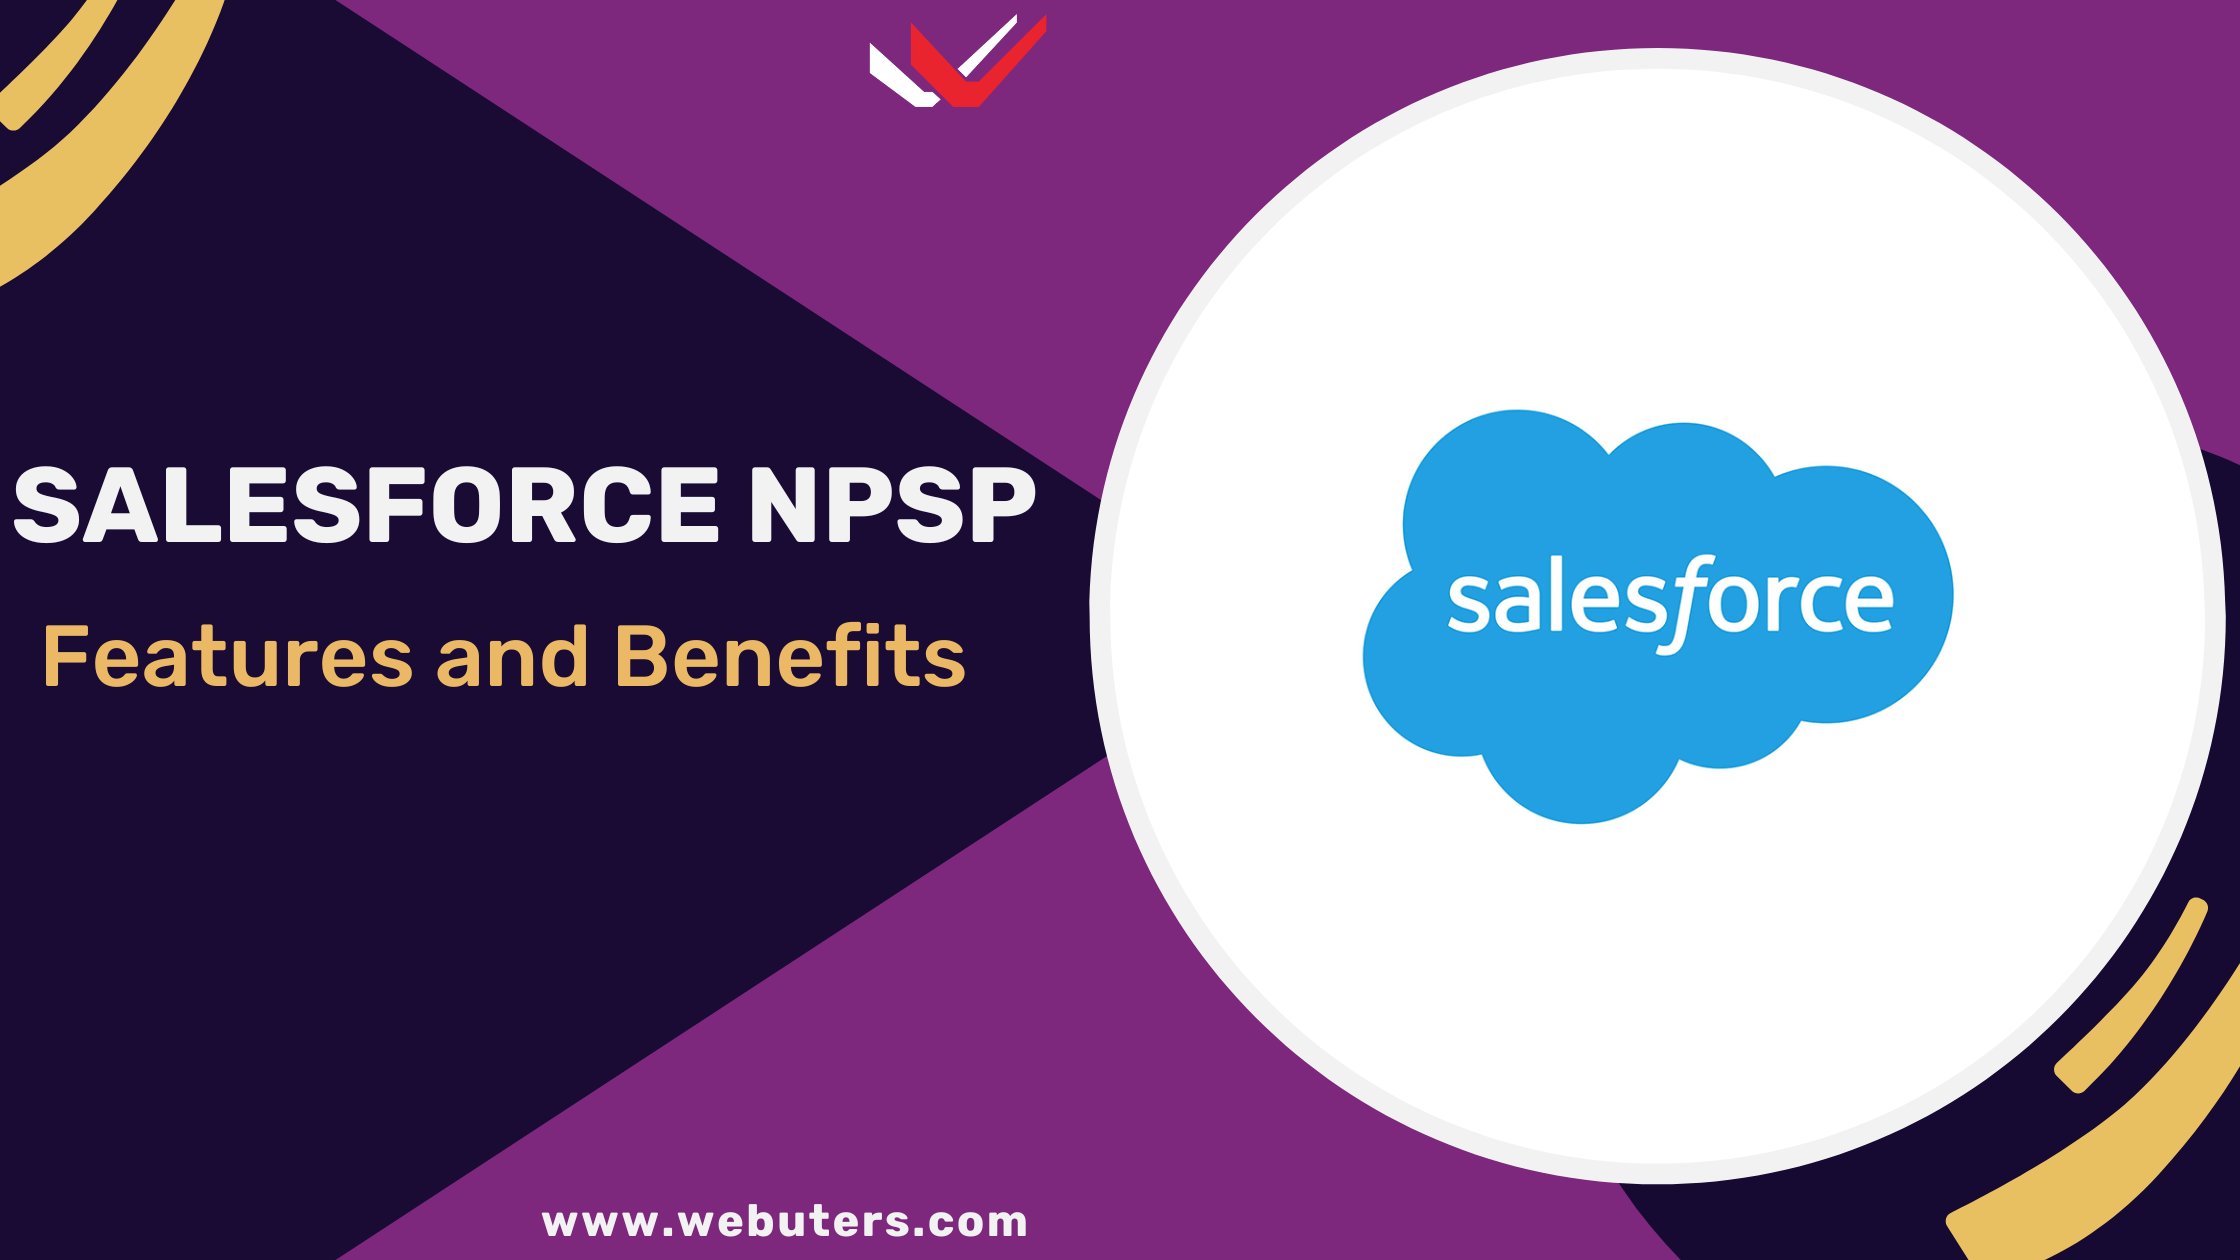 Salesforce NPSP: A Comprehensive Overview of its Benefits and Features